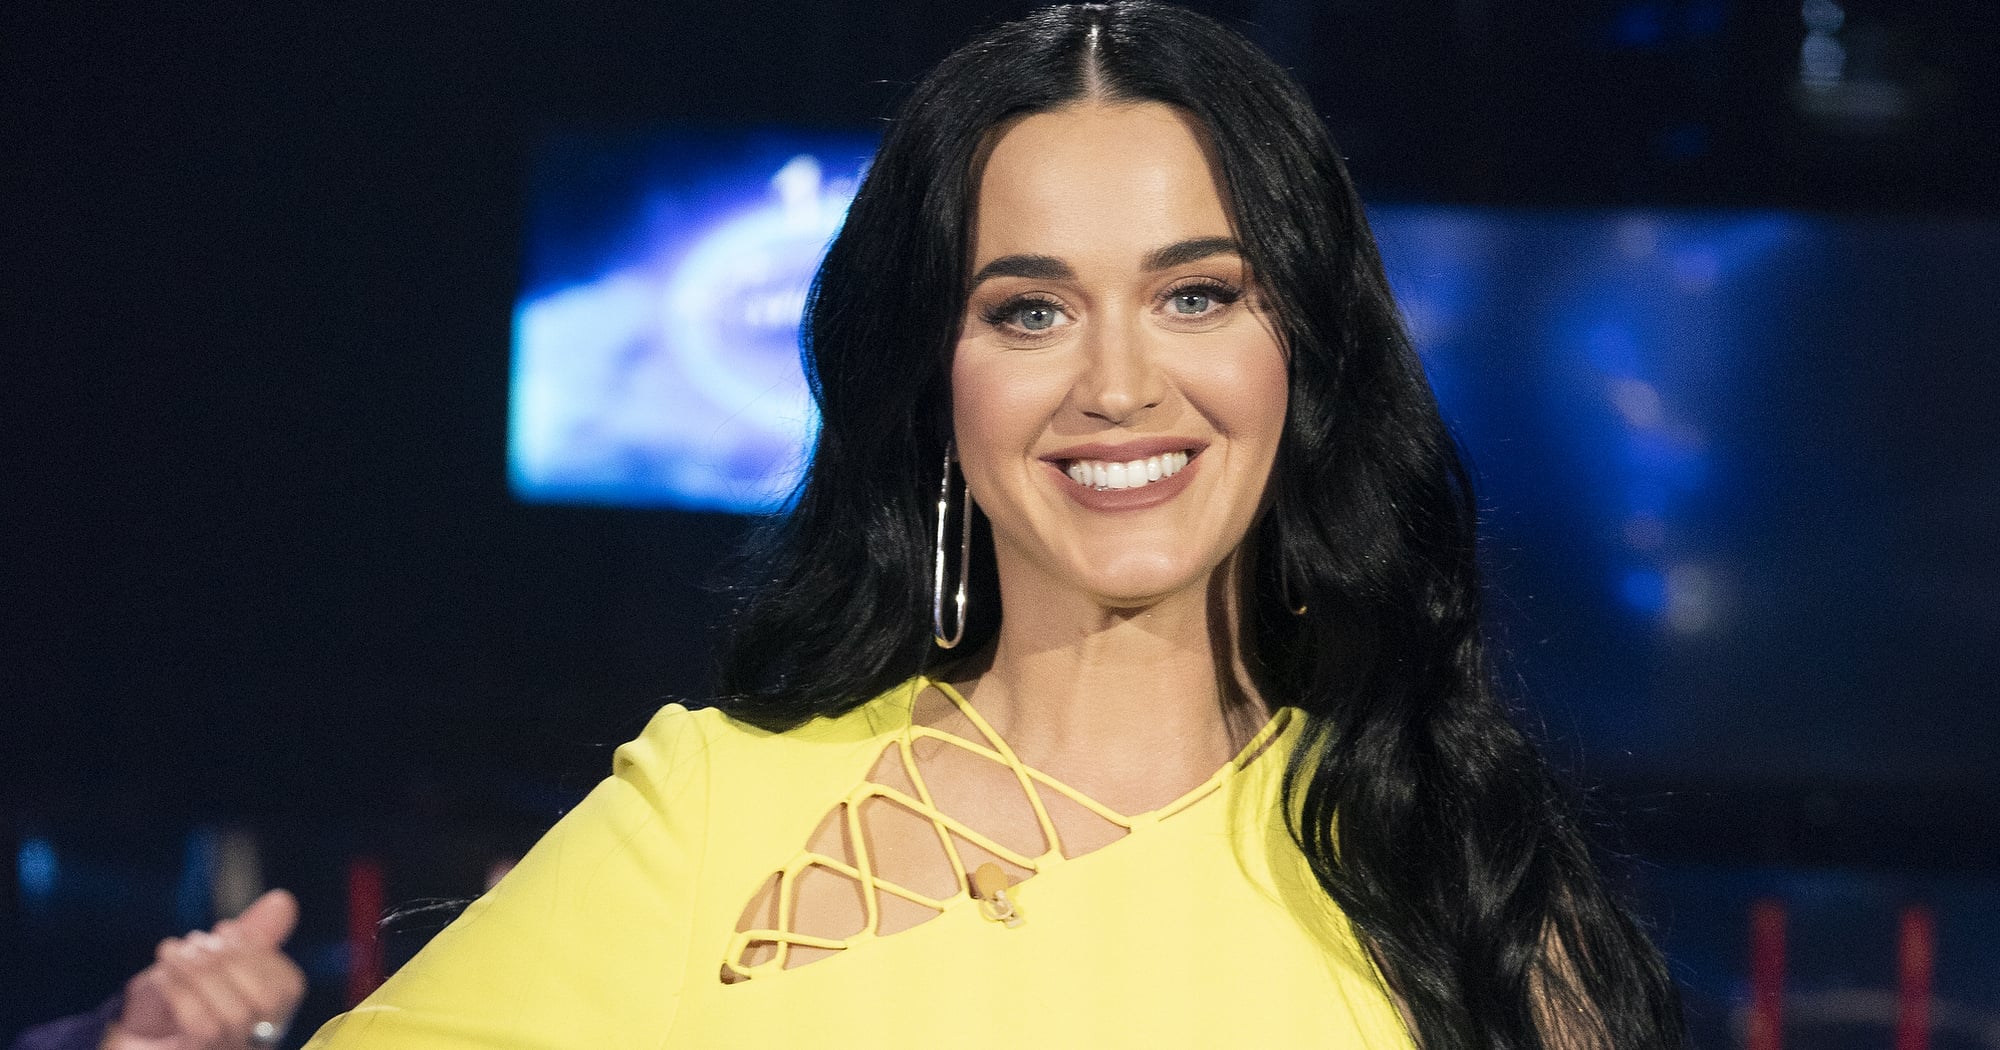 Katy Perry’s Tattoo Collection Includes an End-of-Tour Tradition